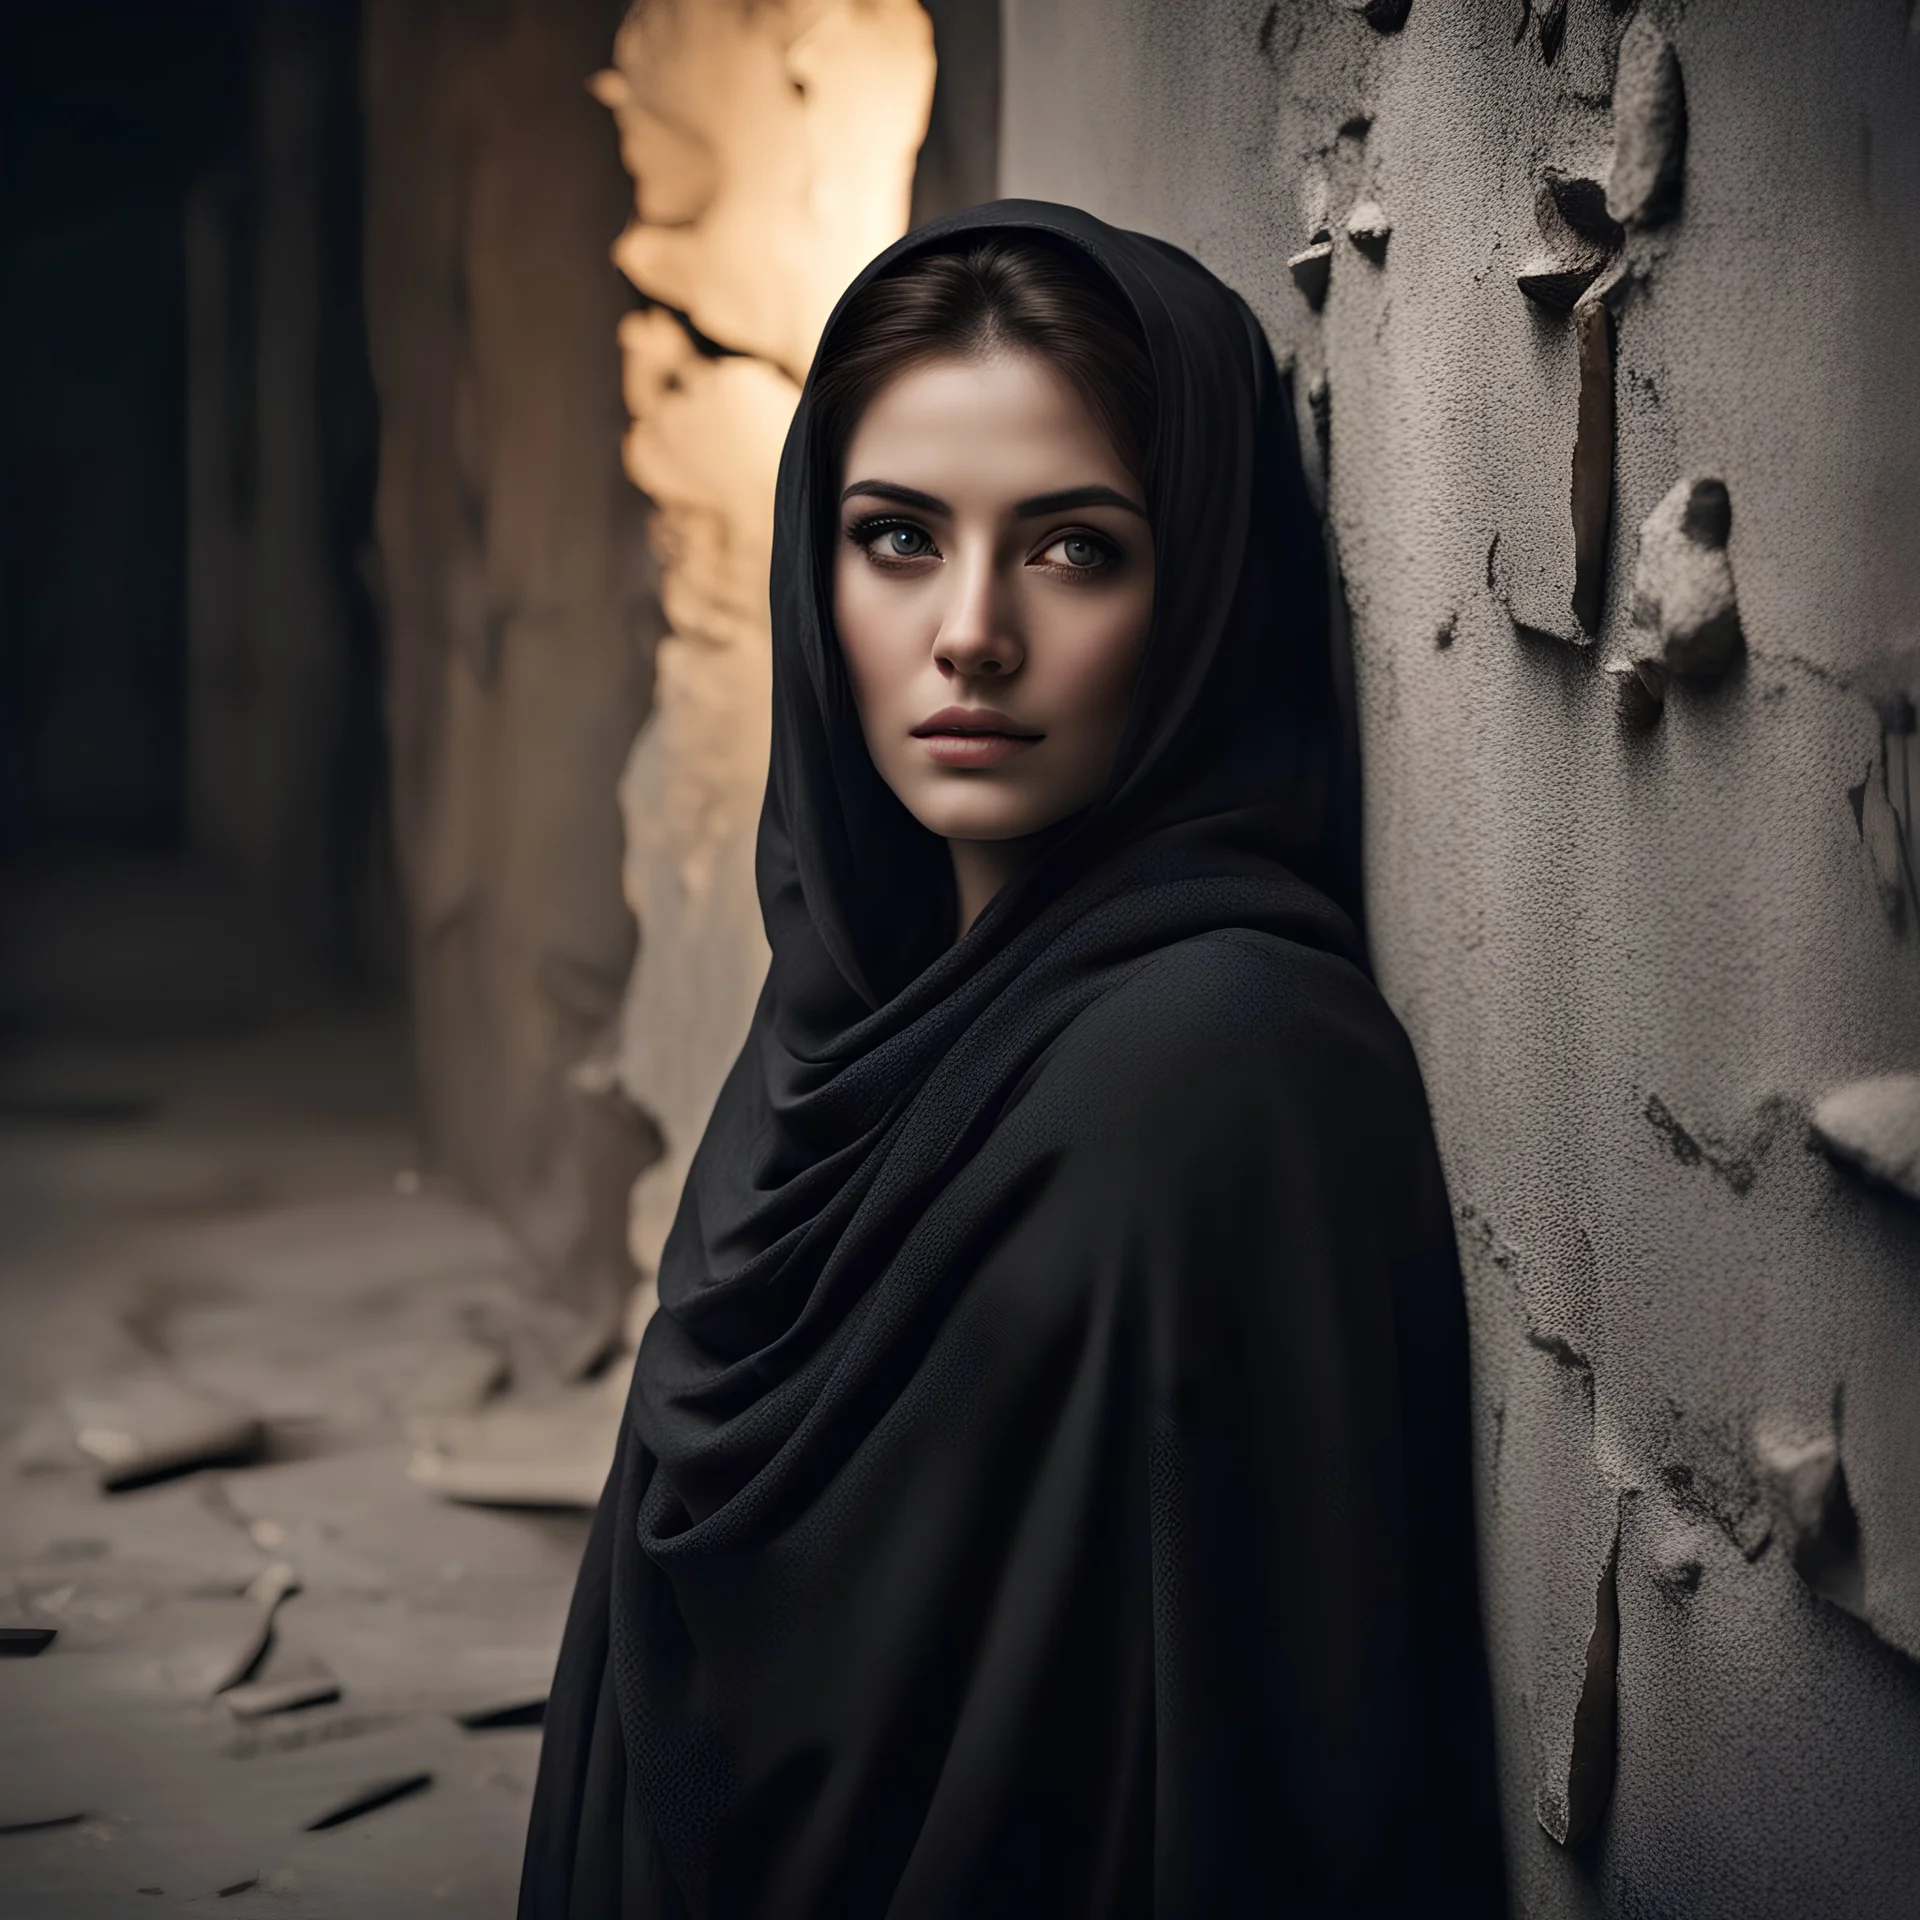 Hyper Realistic Young-Beautiful-Pashto-Woman-With-Beautiful-Eyes in black shawl peeking-half-faced behind a cracked-wall at night with dramatic & cinematic ambiance